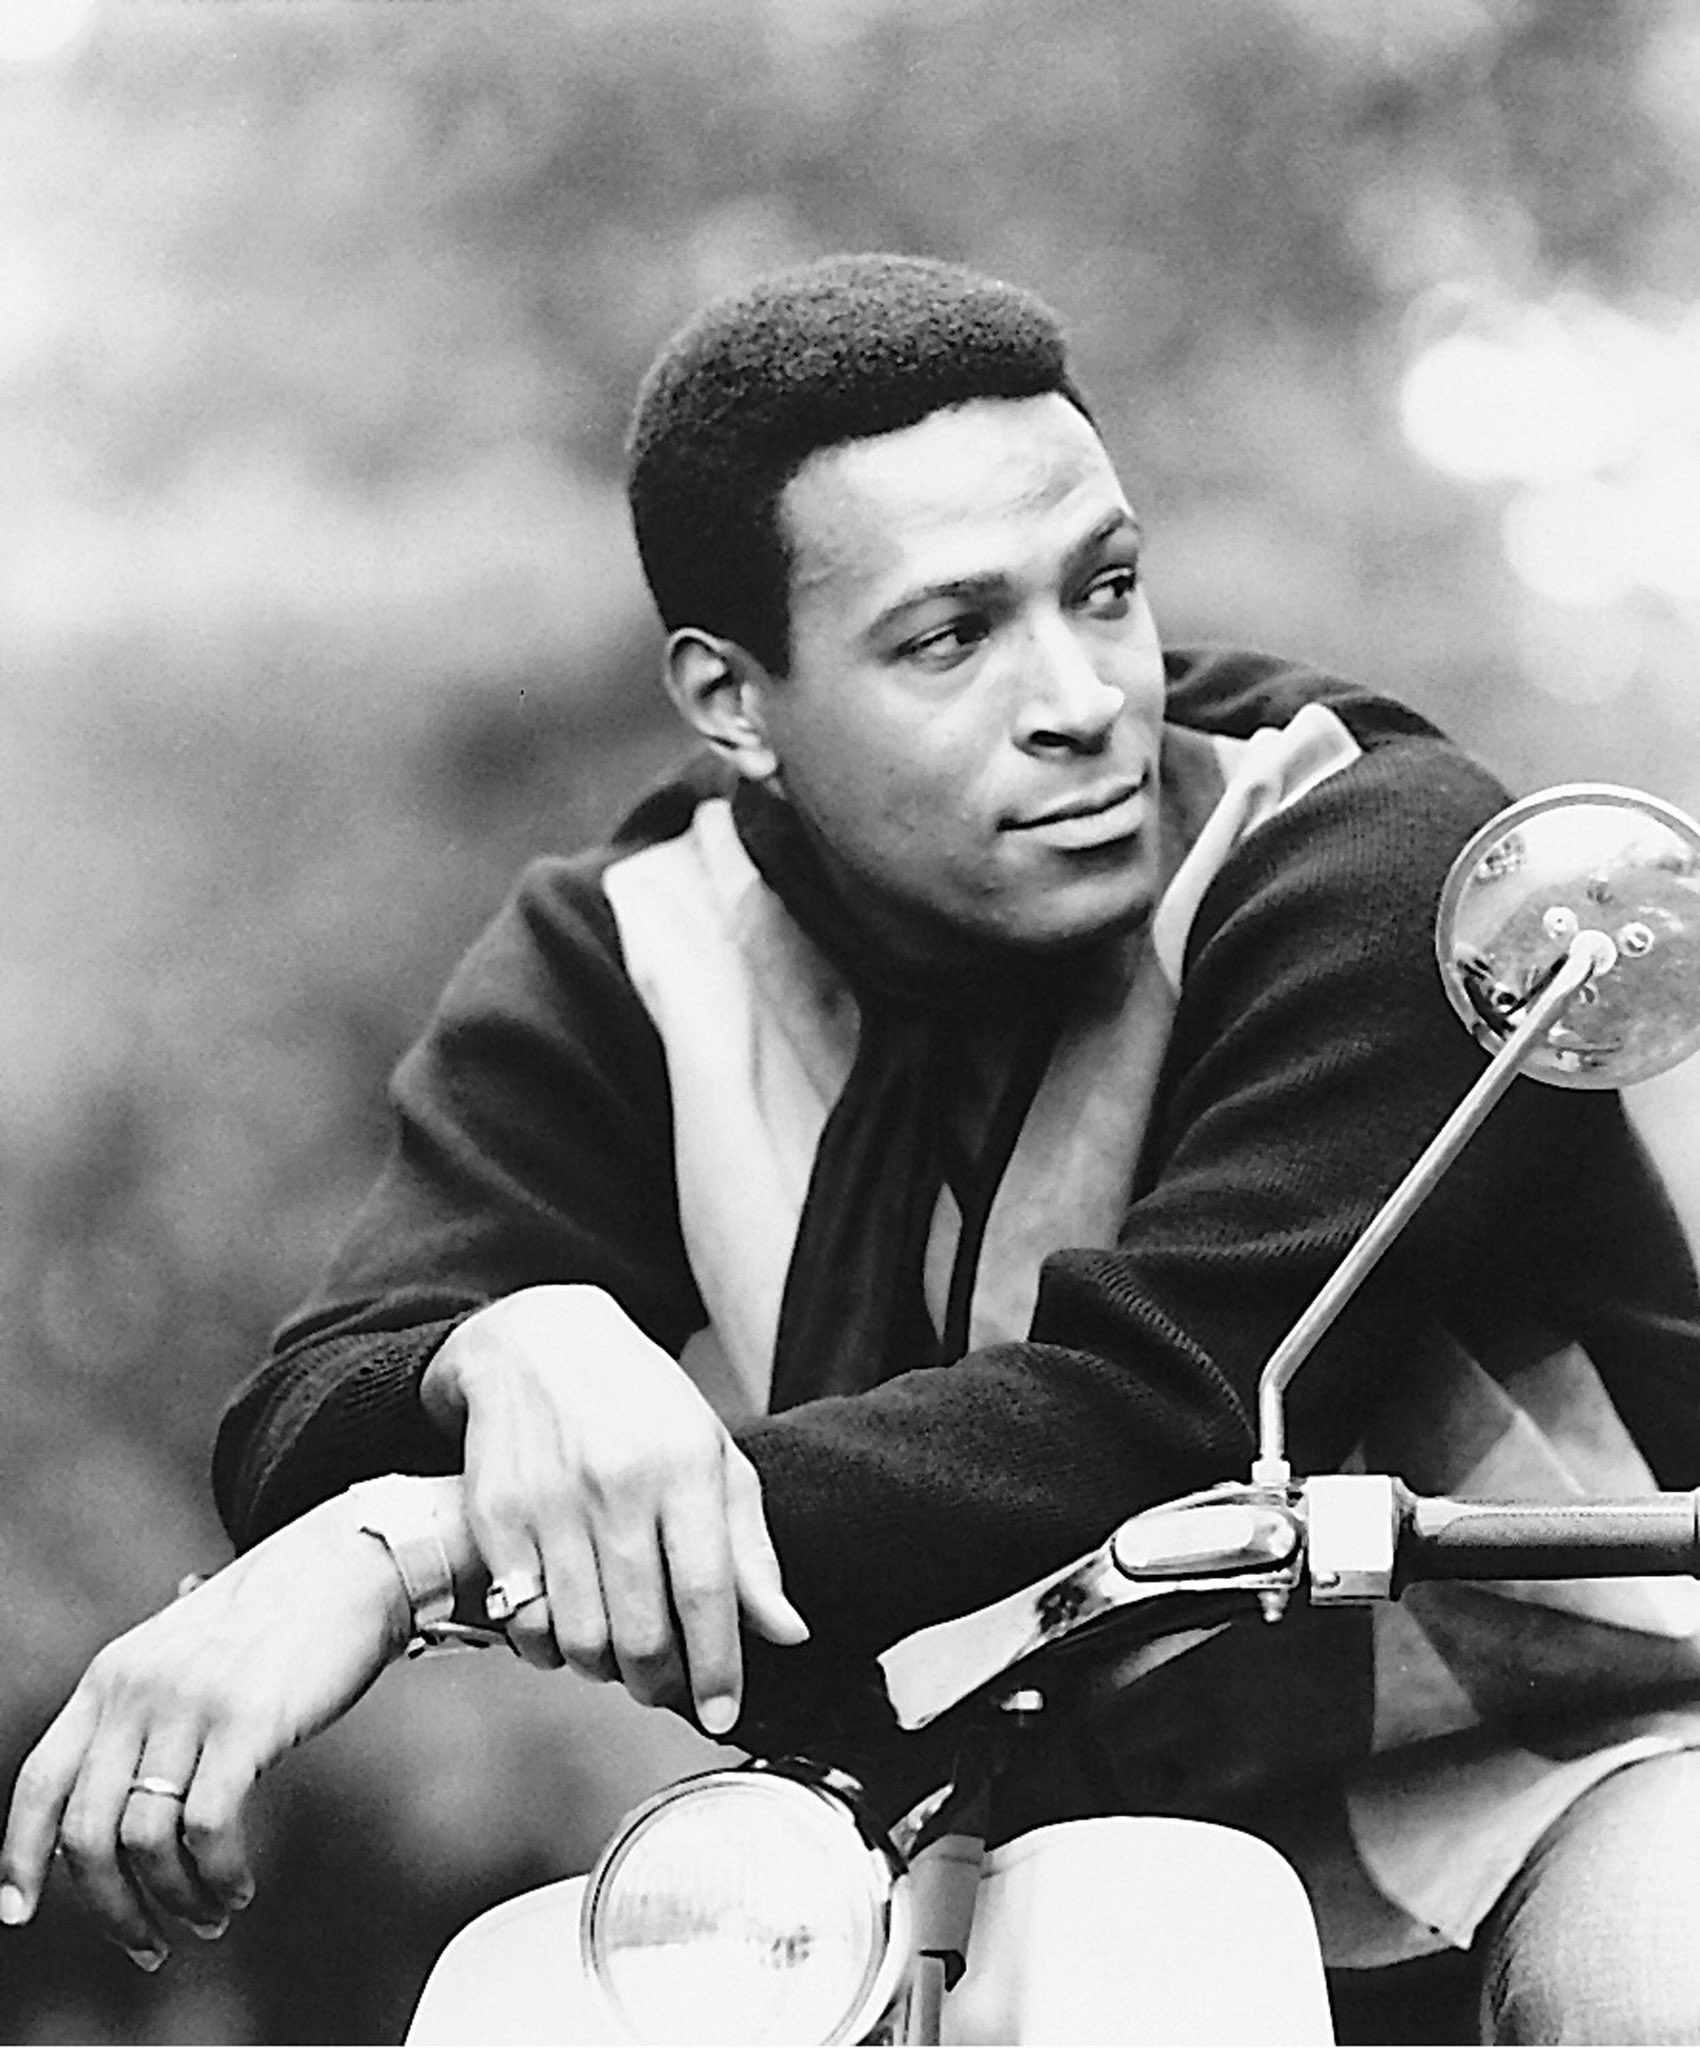 A little late, but can\t forget about the OG... Happy Birthday Marvin Gaye! 